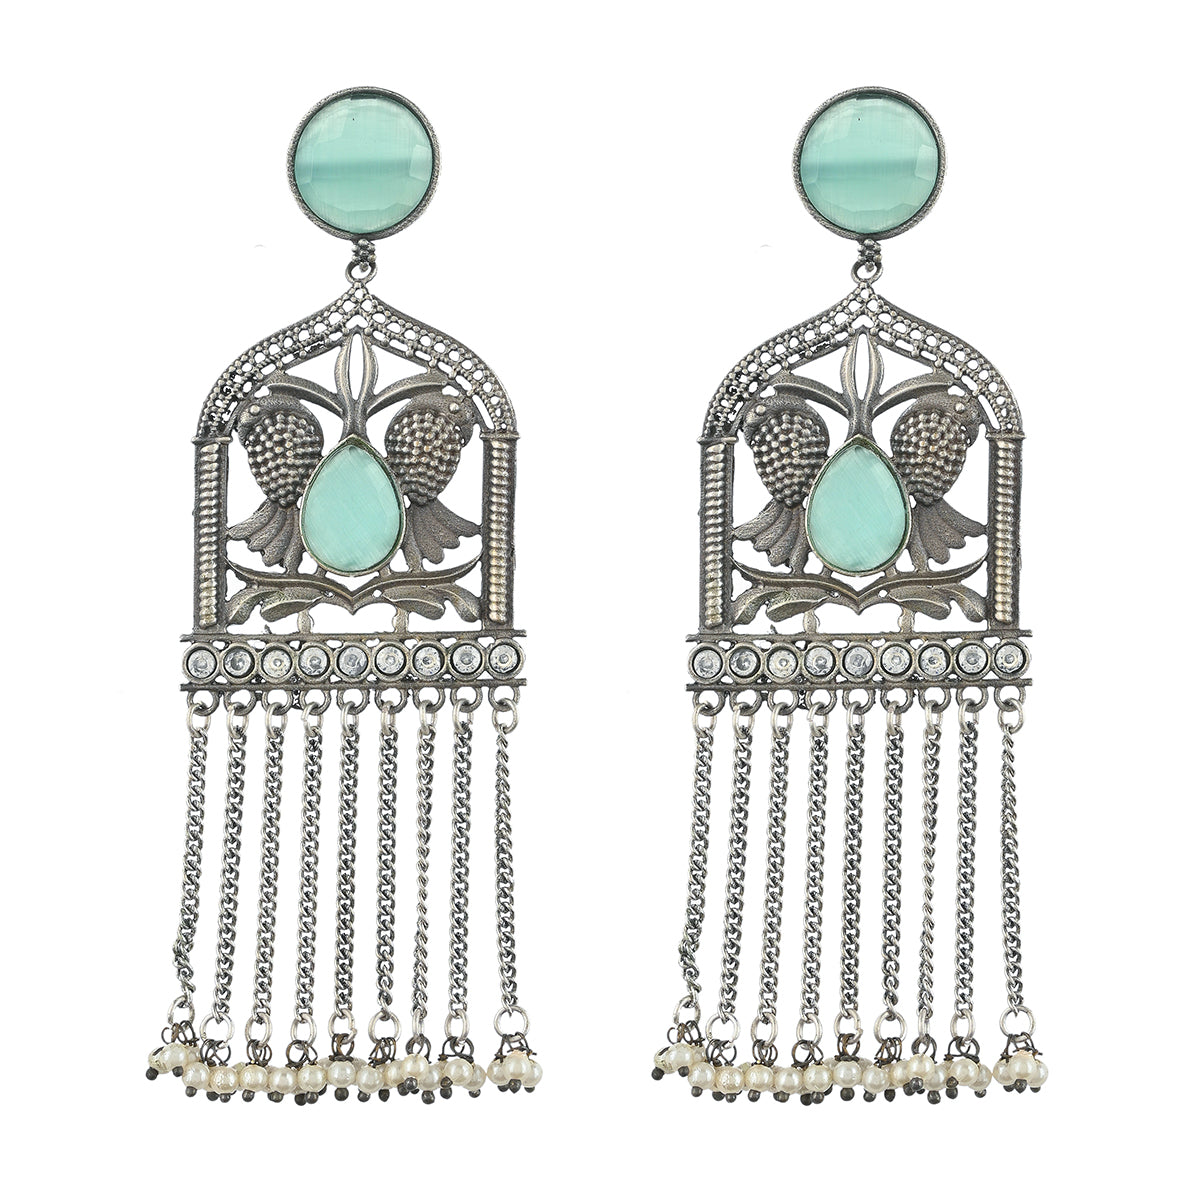 Women's Antique Elegance Teardrop And Round Cut Gems And Faux Pearls Brass Silver Plated Dangler Earrings - Voylla